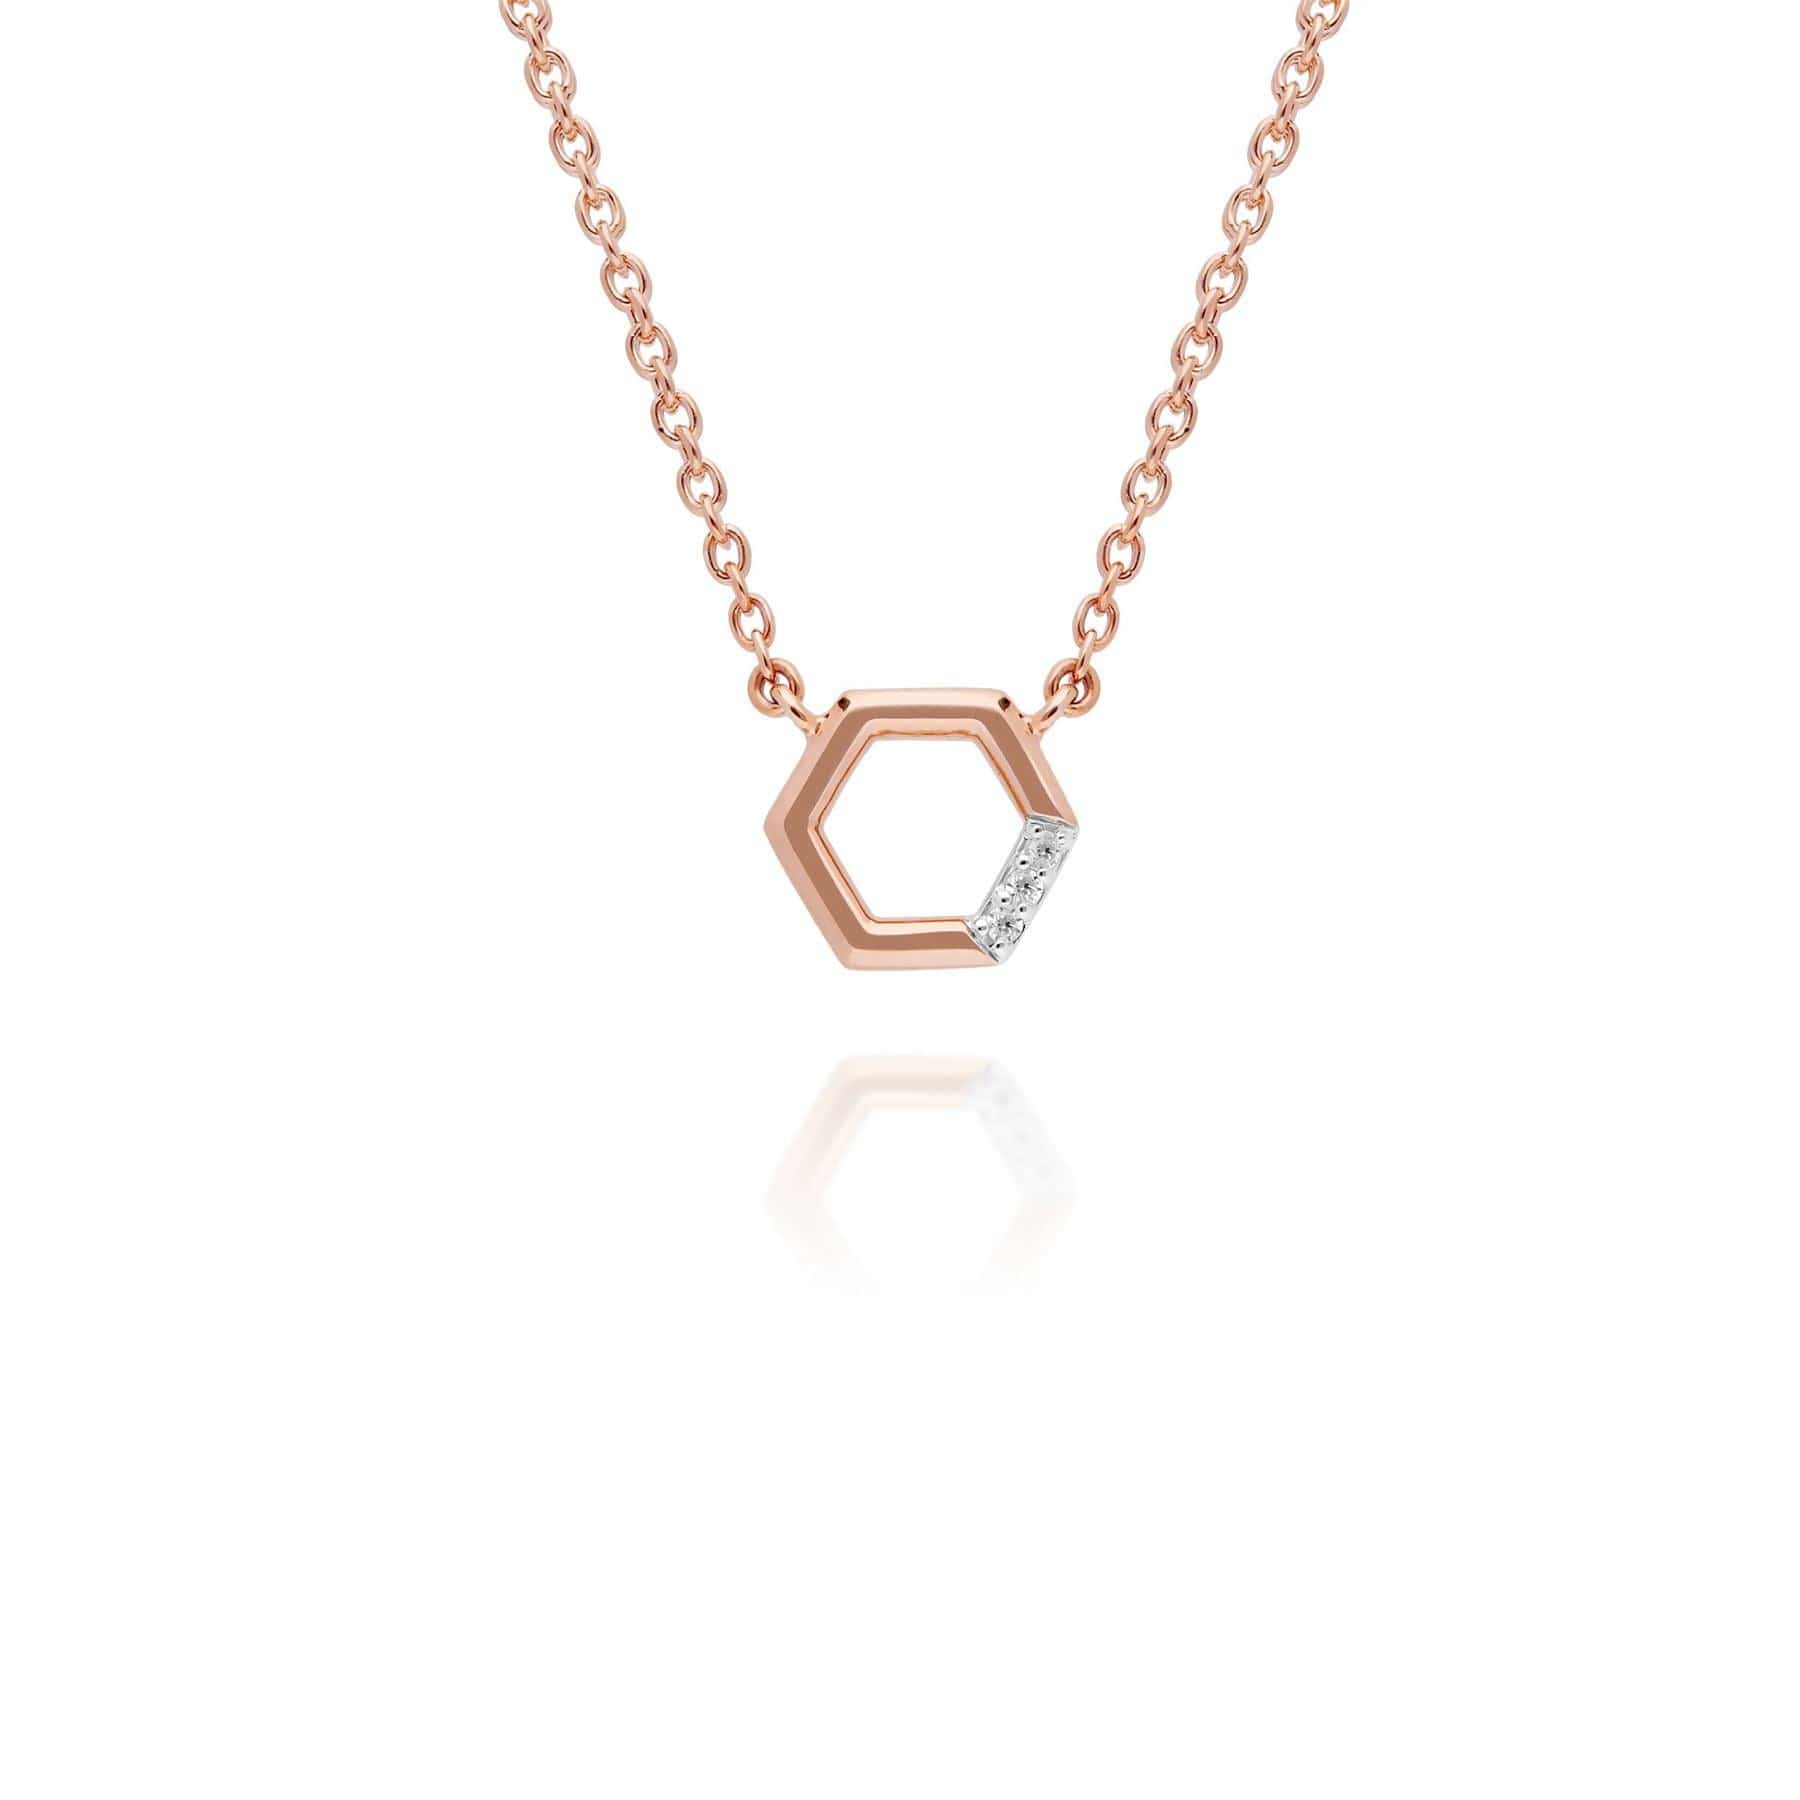 191N0230019-191E0400019 Diamond Pave Hexagon Necklace & Stud Earring Set in 9ct Rose Gold 2